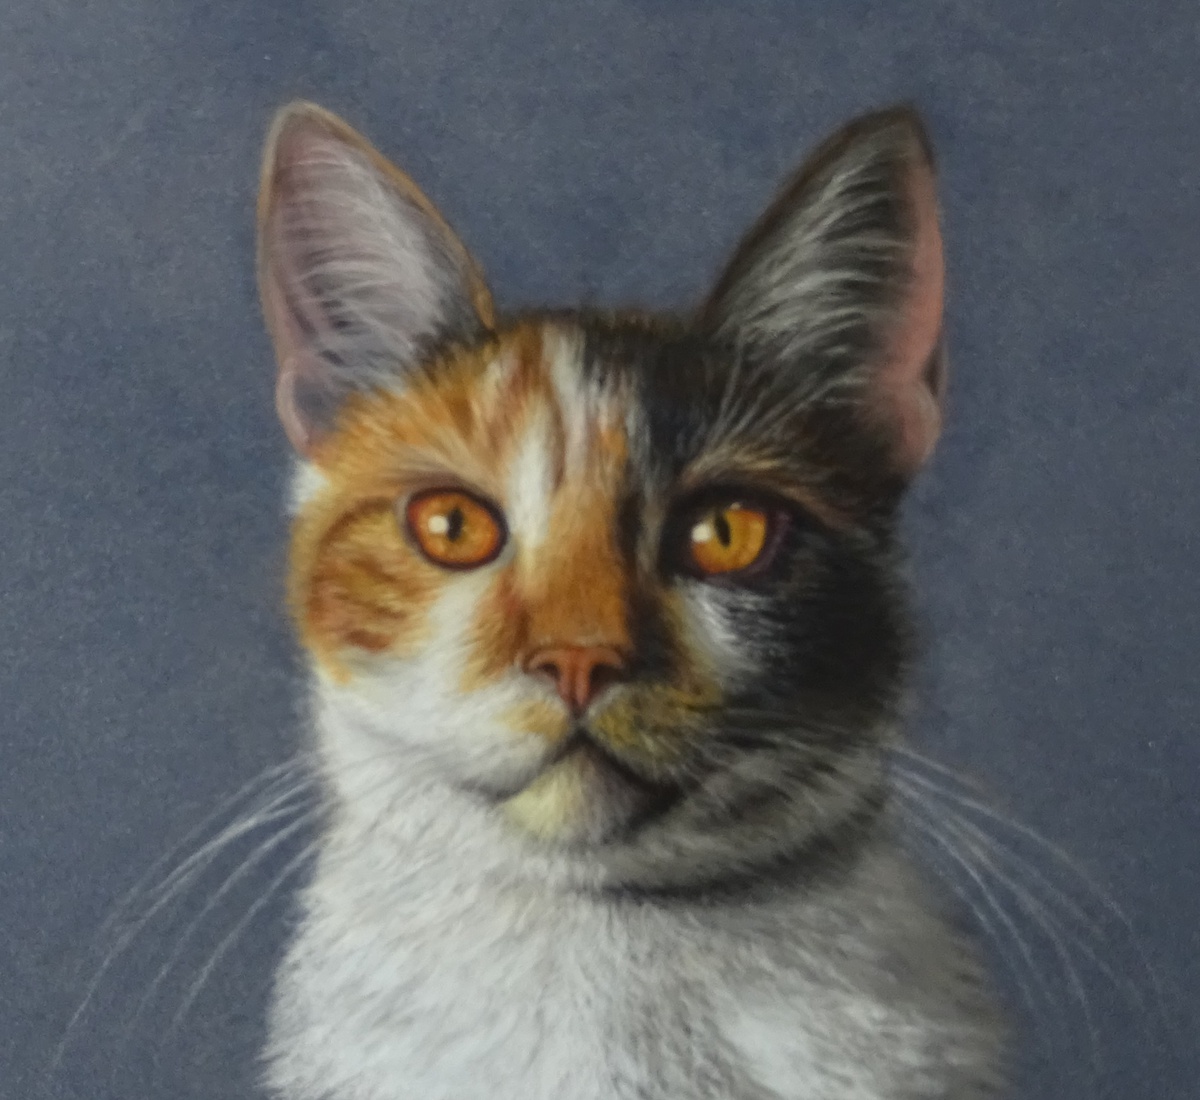 Poes in pastel